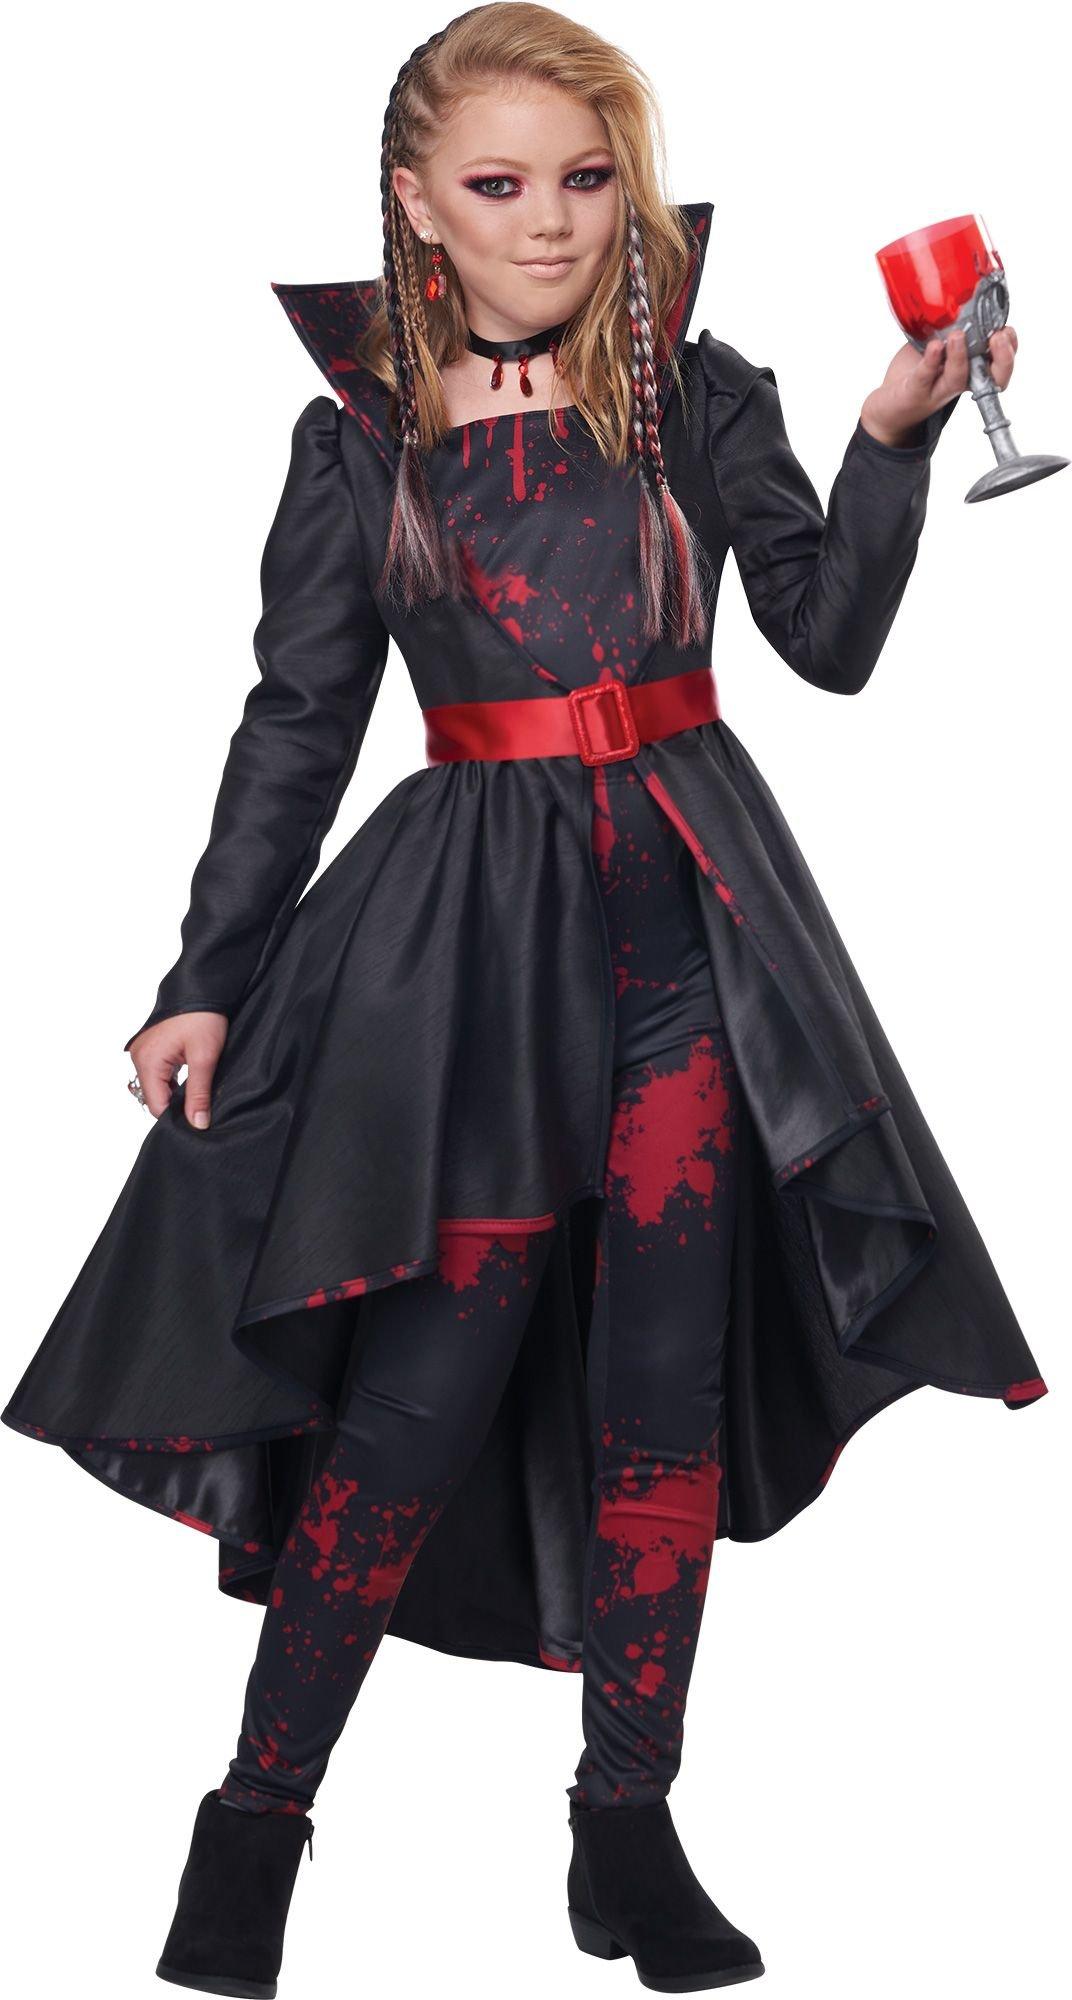 Bad Blood Vampire Costume for Kids | Party City